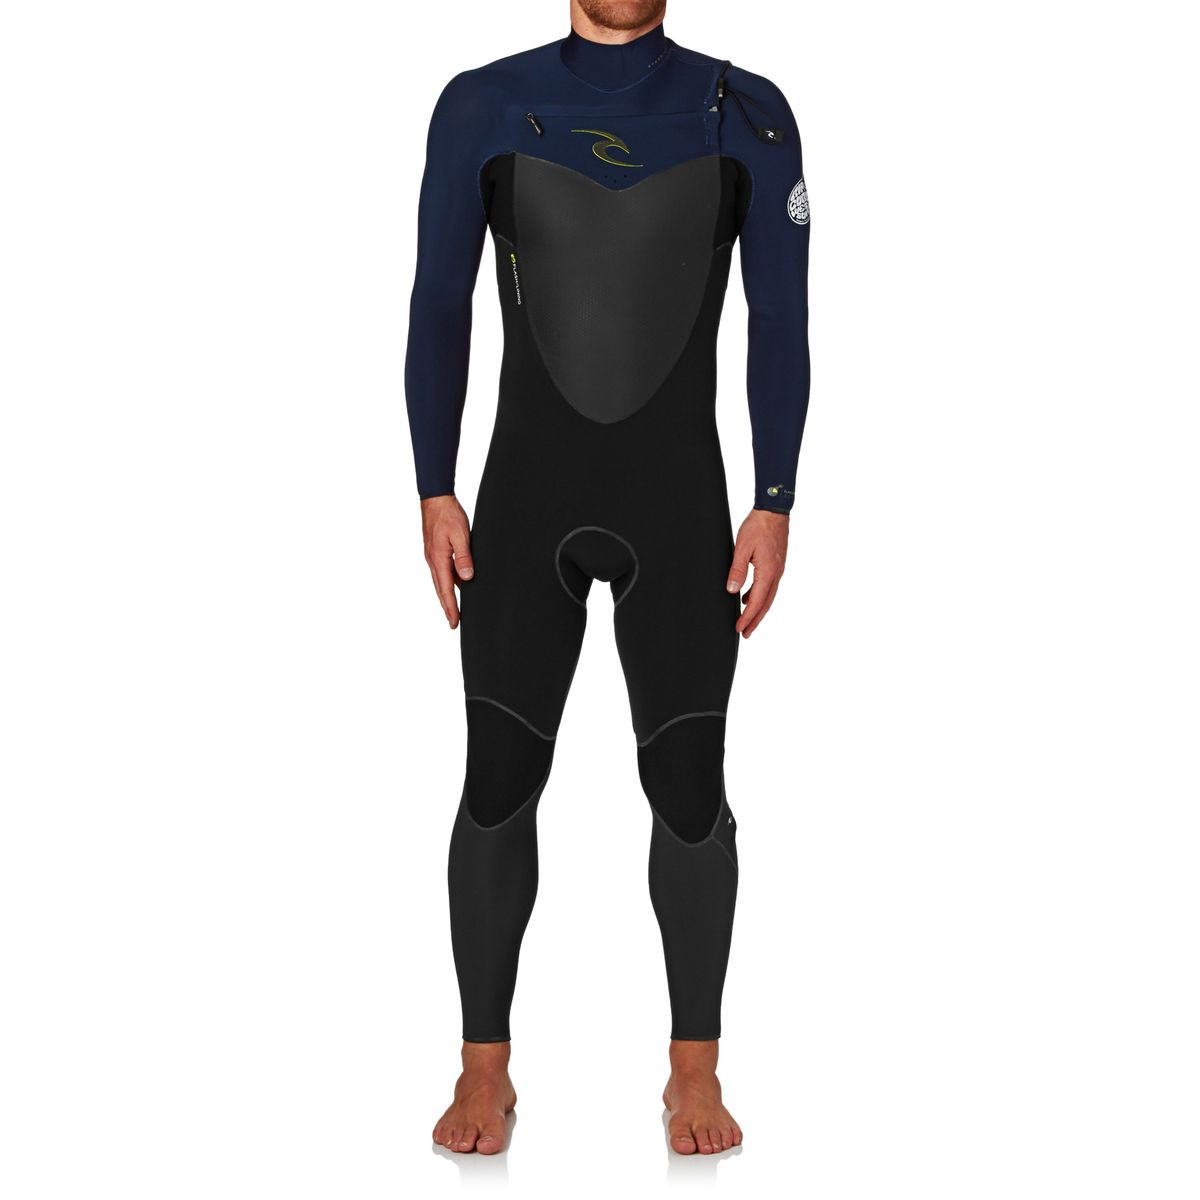 Rip Curl Flashbomb 3/2mm 2017 Chest Zip Wetsuit - Navy